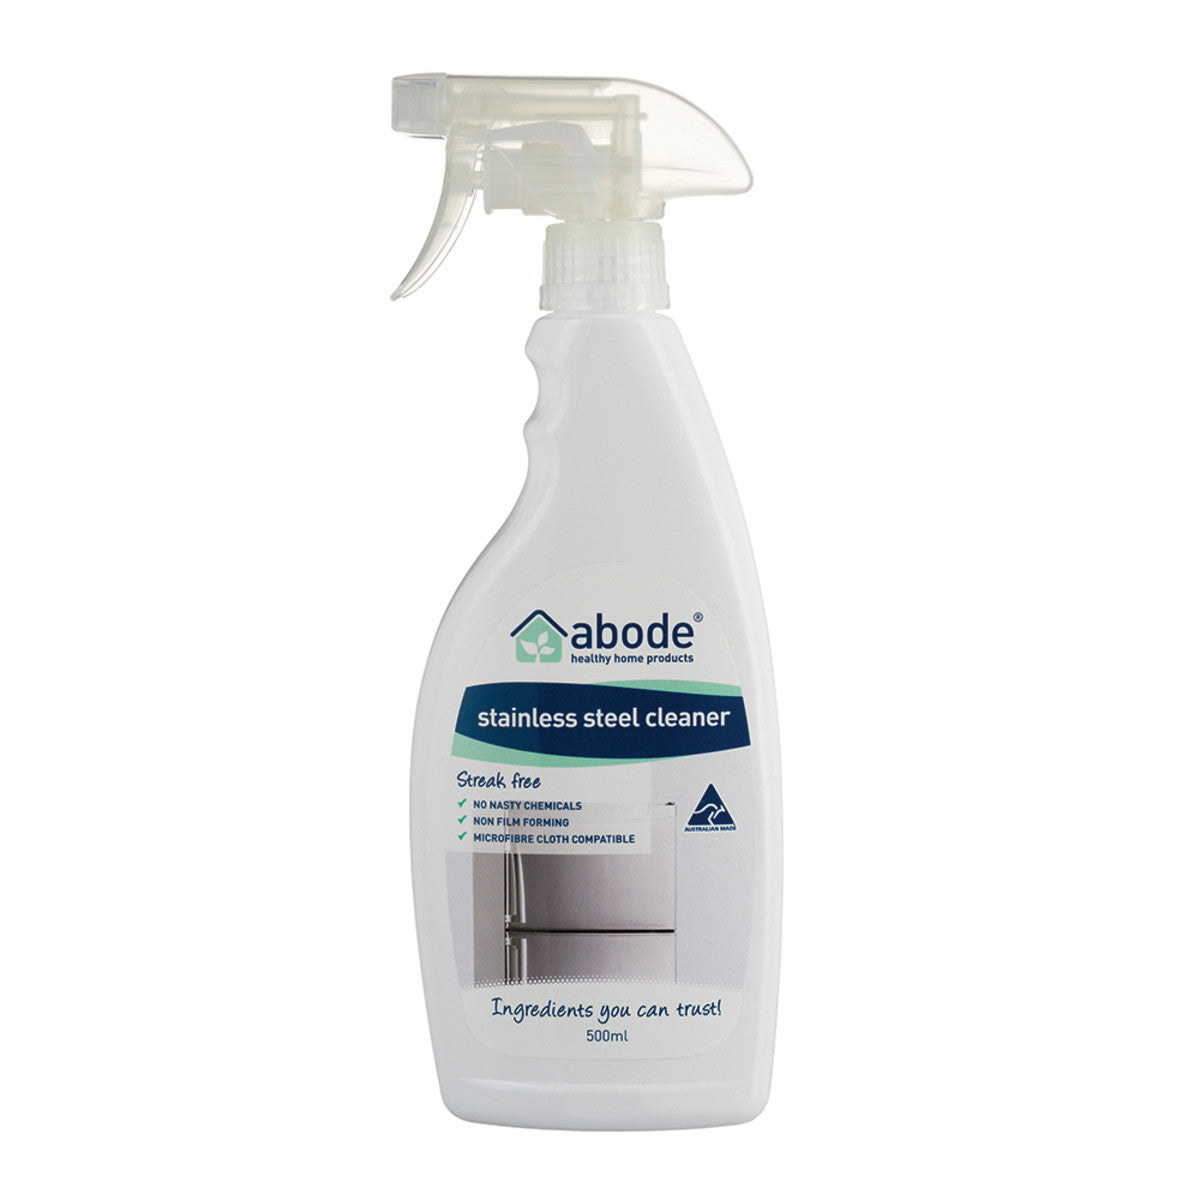 Abode – Stainless Steel Cleaner Spray